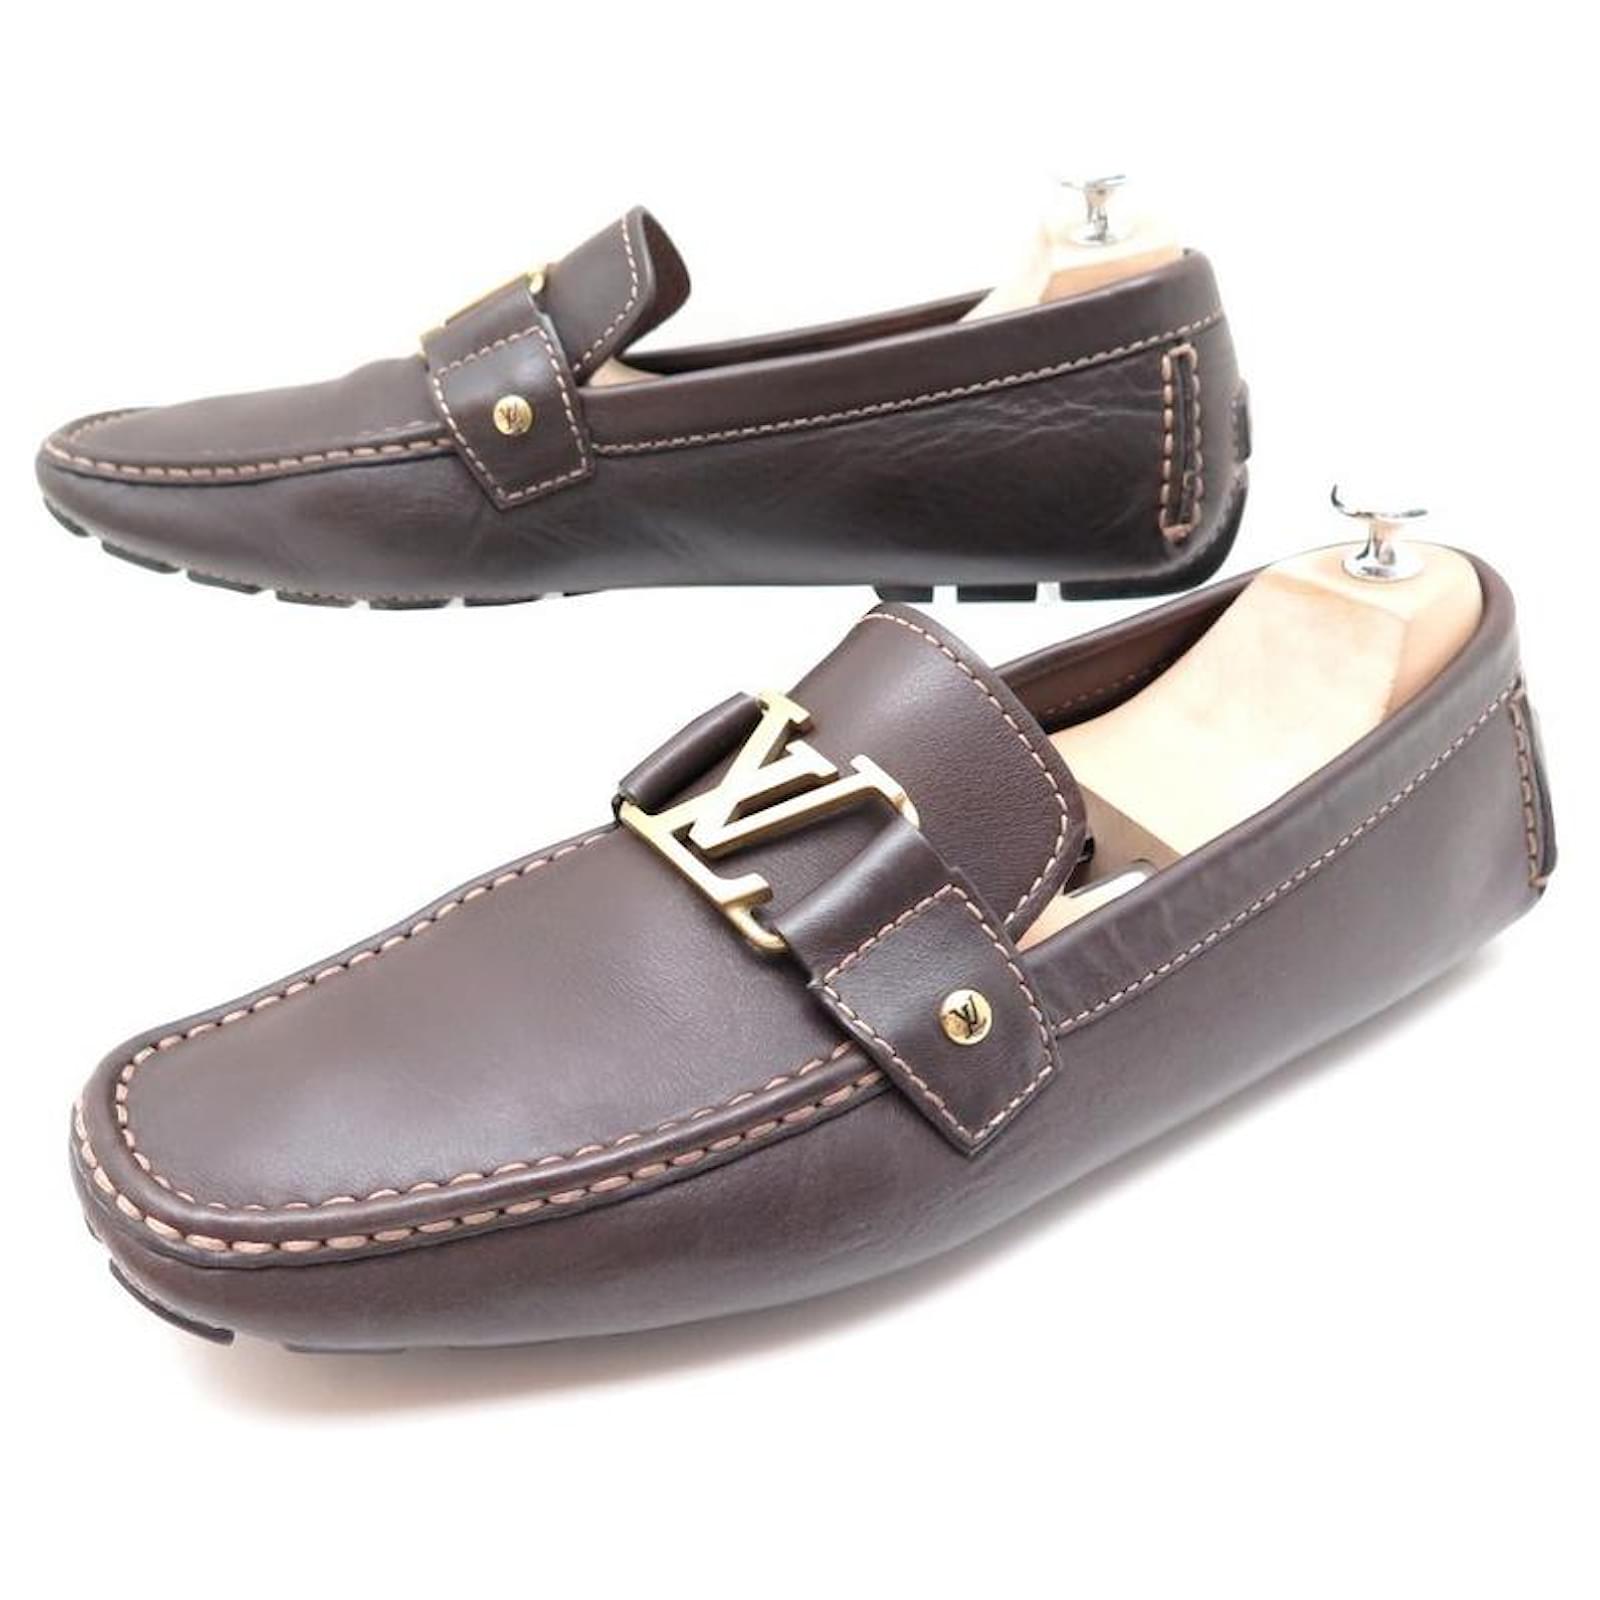 LOUIS VUITTON MONTE CARLO SHOES 11 45 BROWN LEATHER LOAFERS SHOES